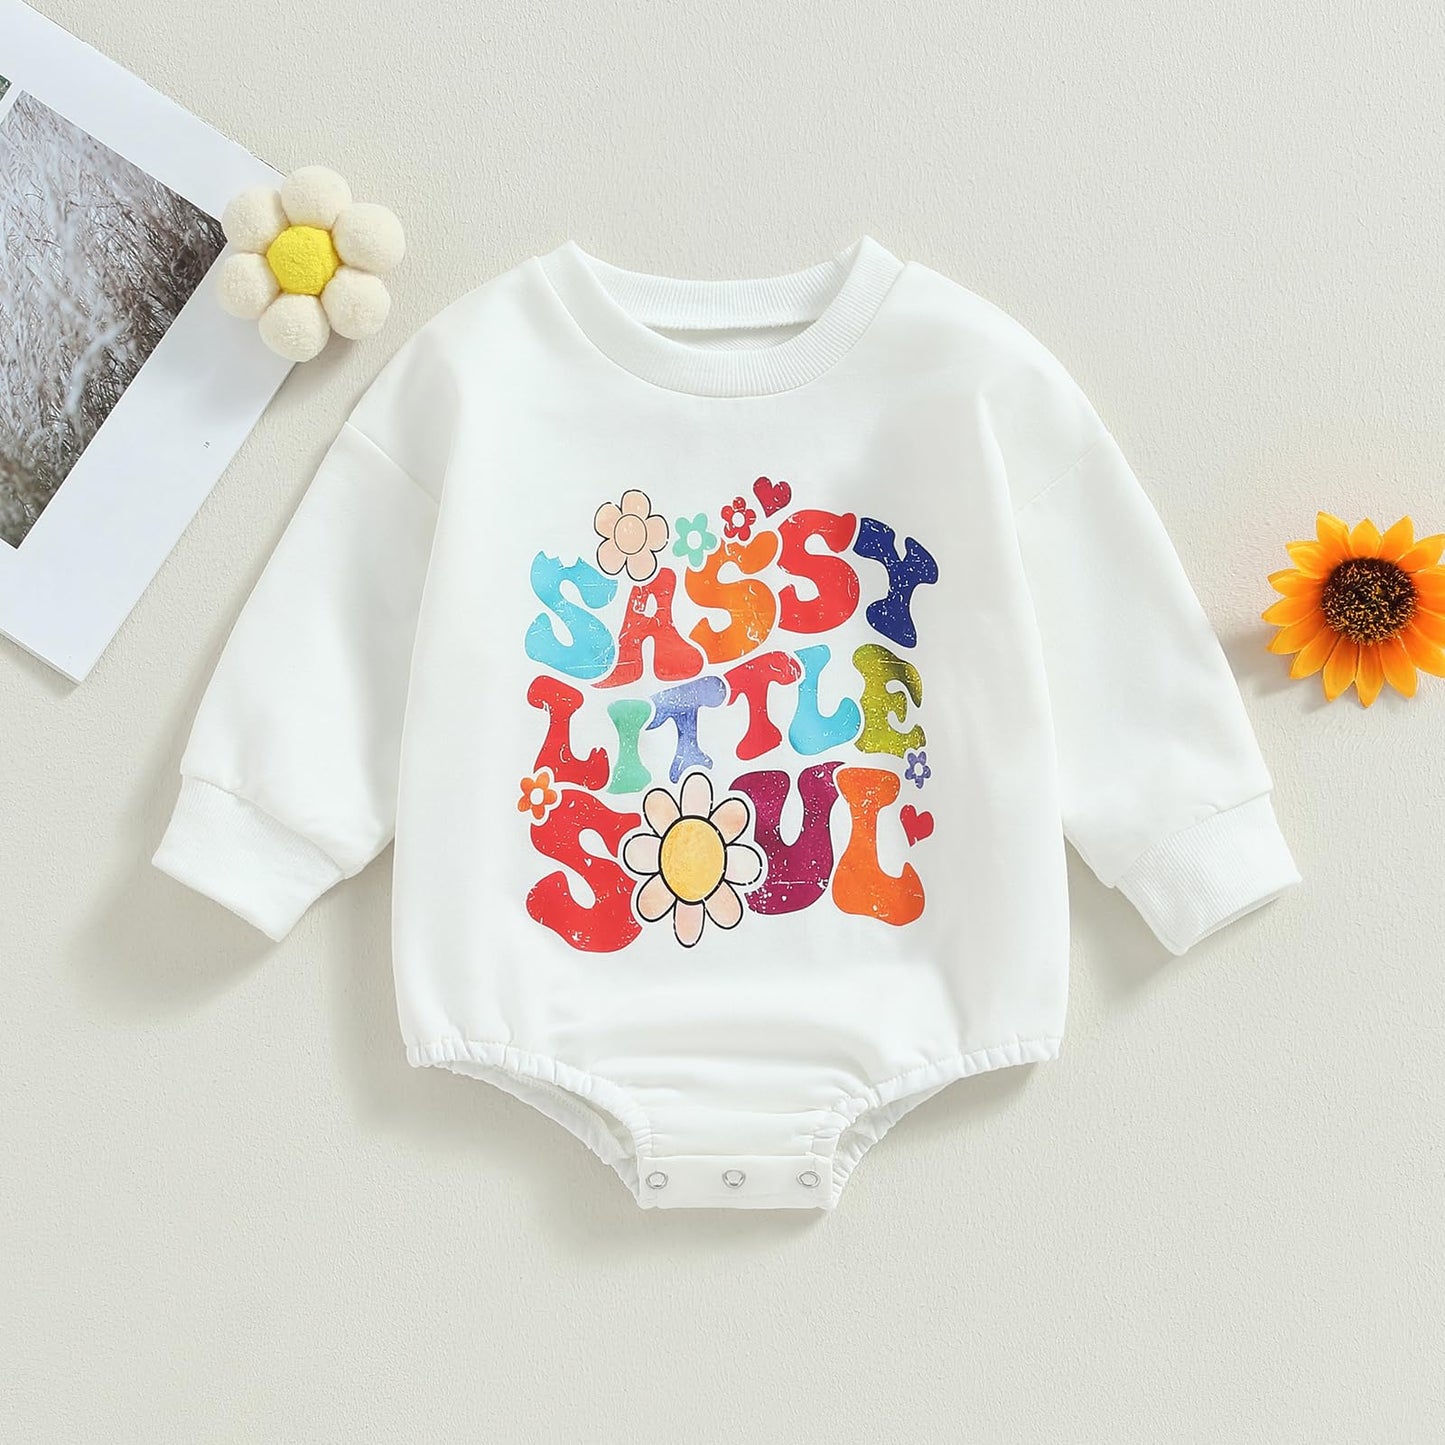 Infant Baby Girl Sweatshirt Romper Oversized Long Sleeve Bubble Romper Top Fall Winter Clothes 0-3 Months